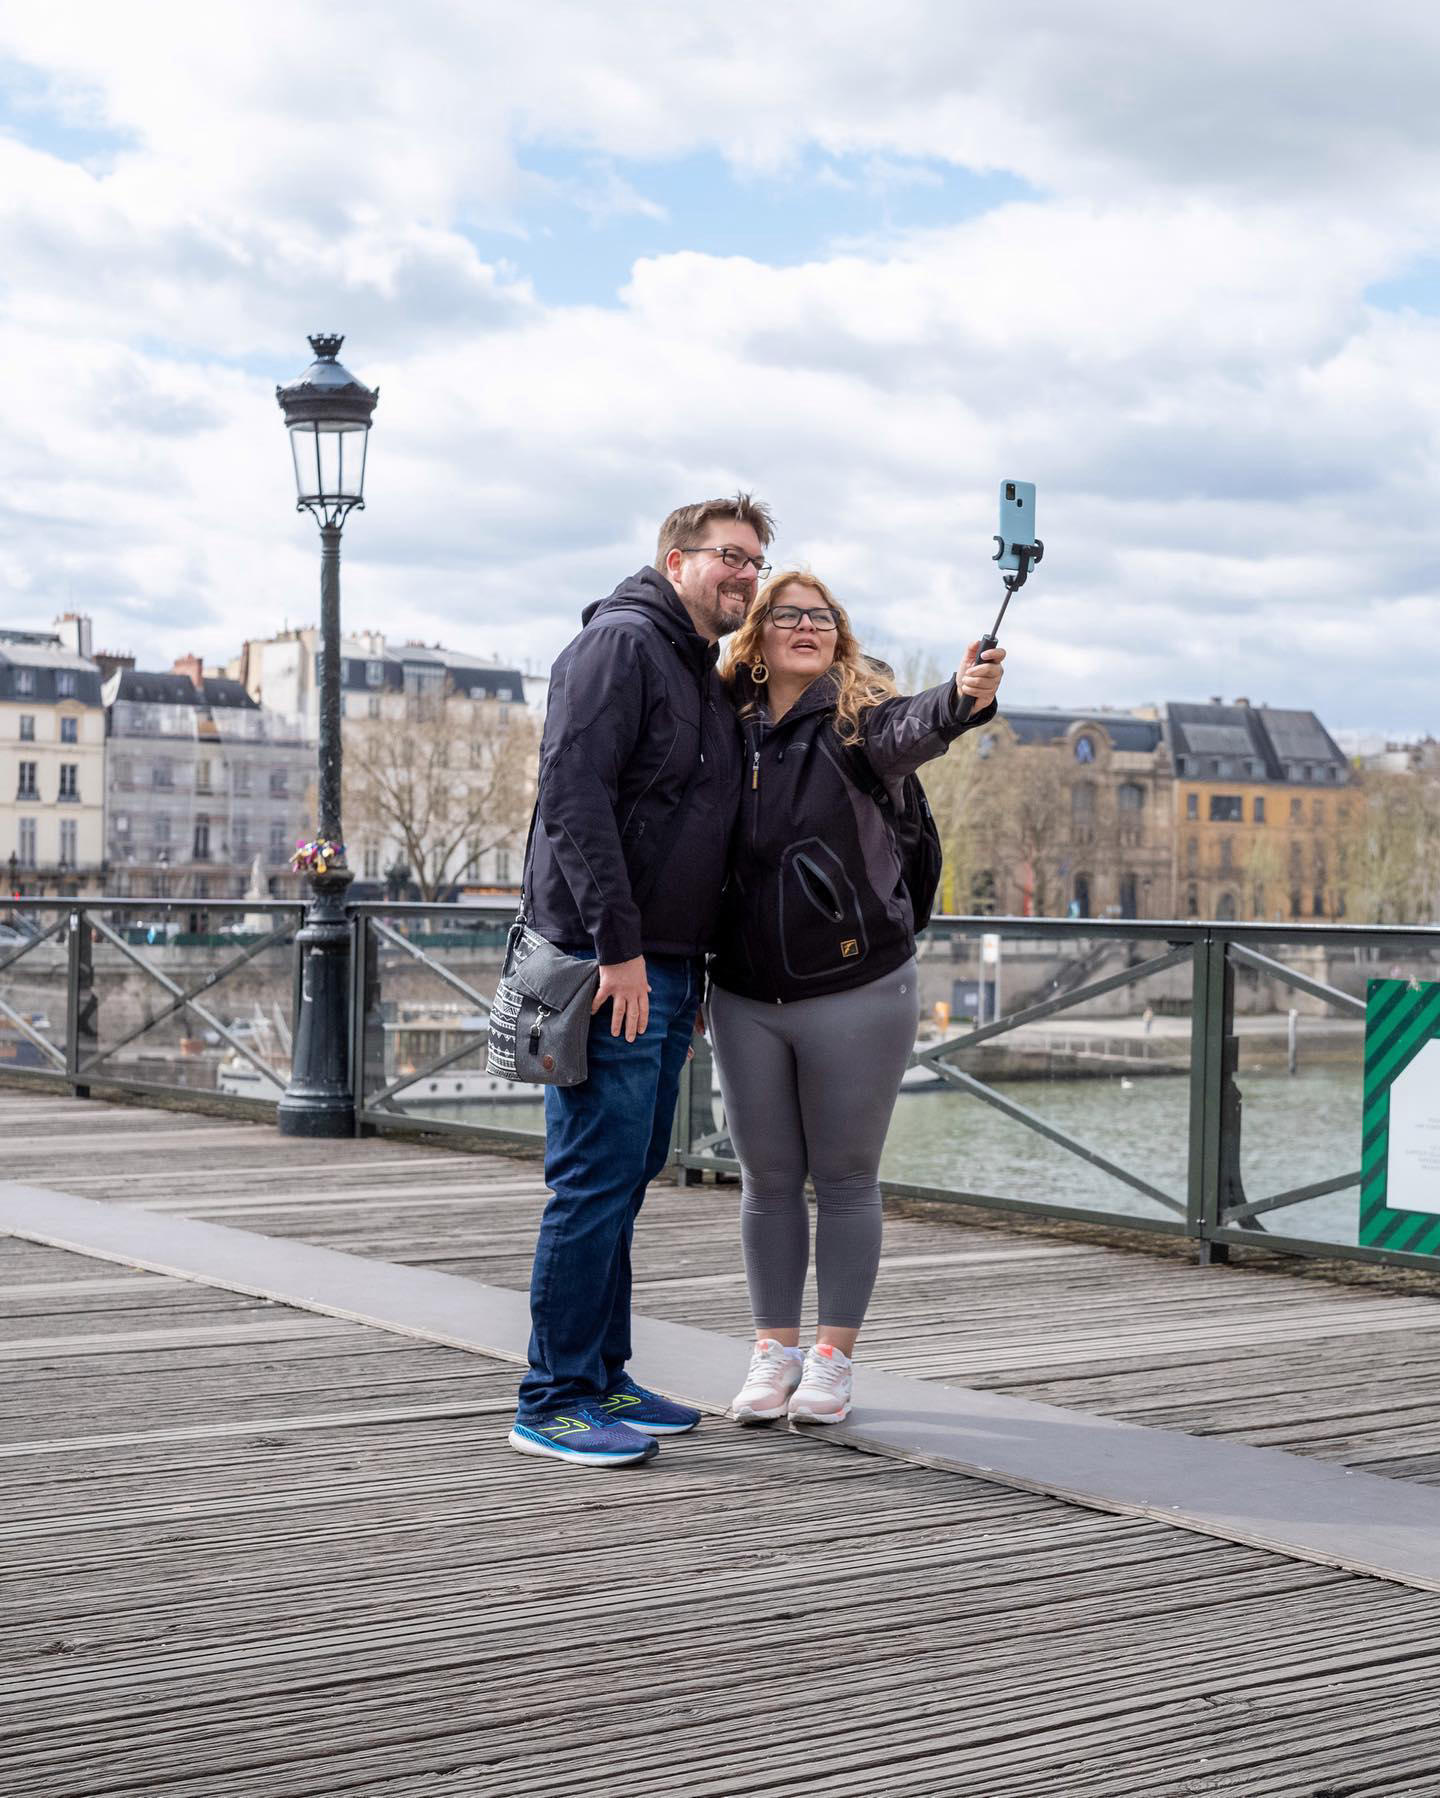 image  1 Always a good time for a selfie #thisisparis always something new to discover, taste and experience